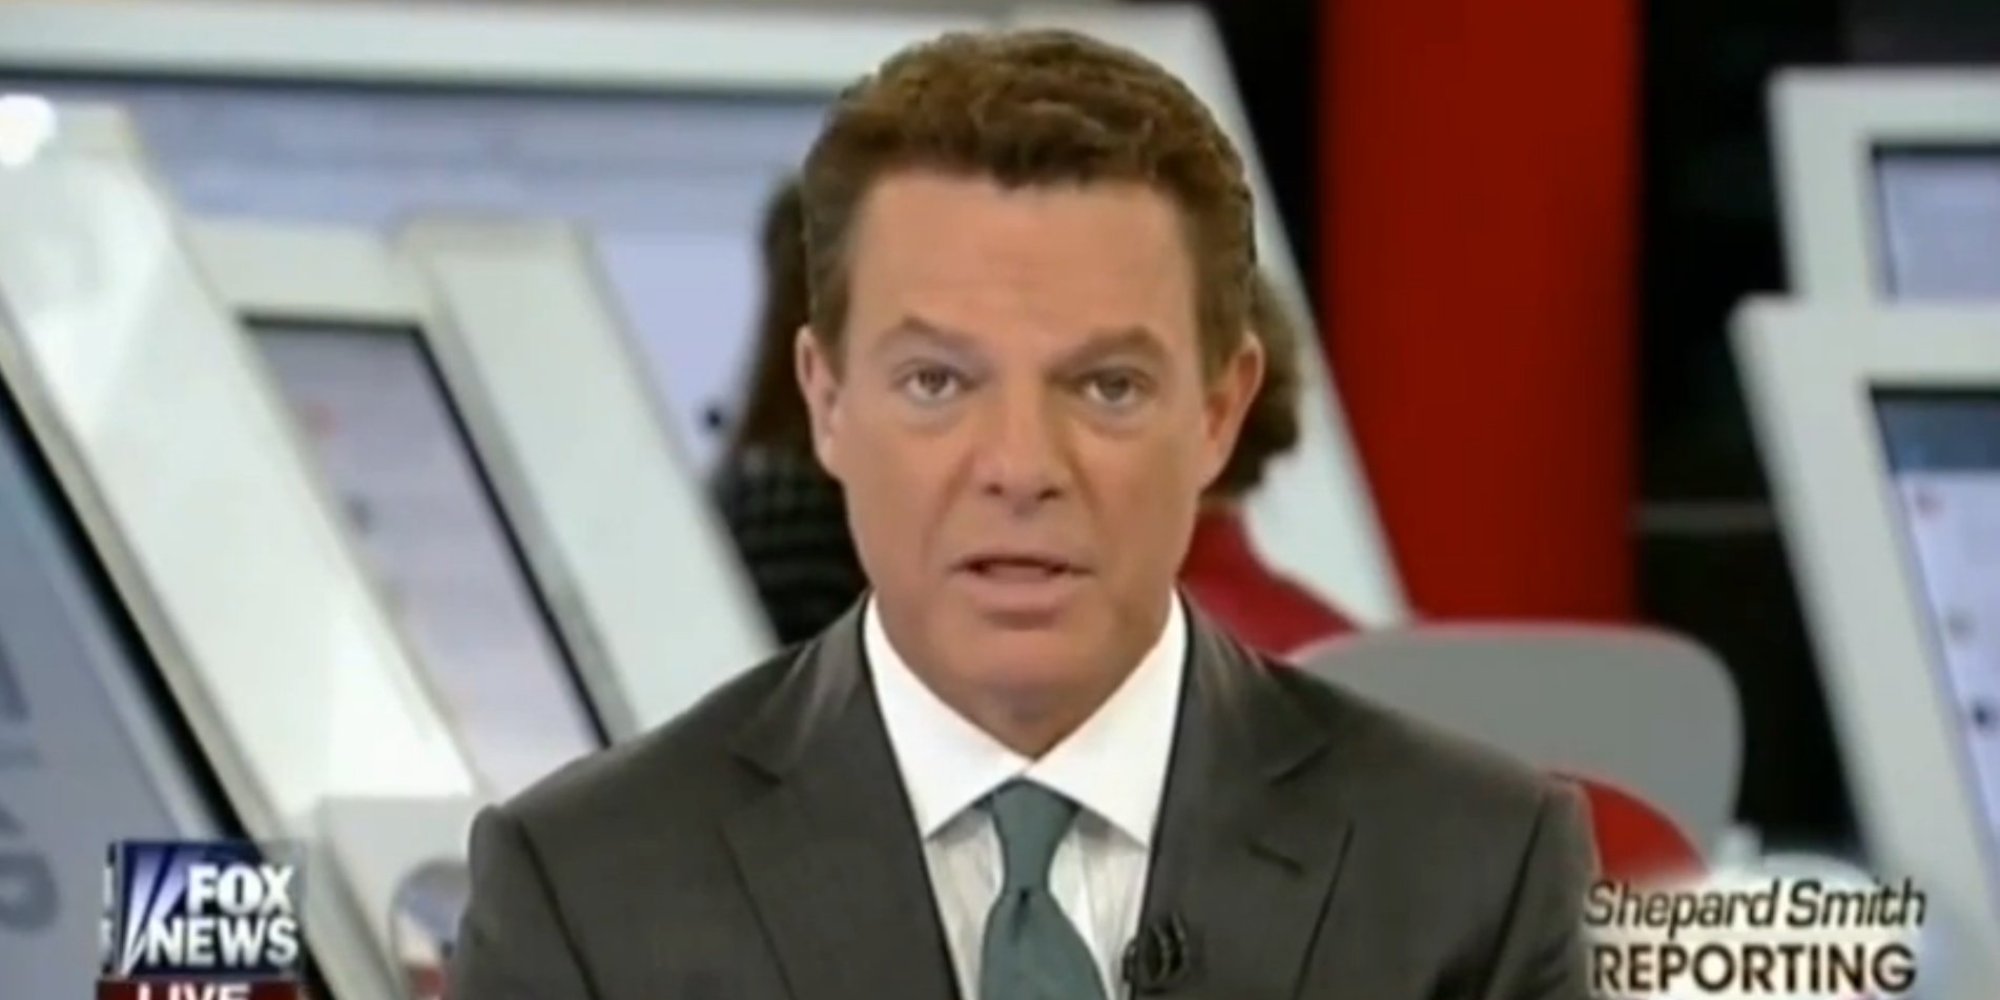 Shepard Smith: 'Do Not Listen To The Hysterical Voices' In The Media About Ebola ...2000 x 1000